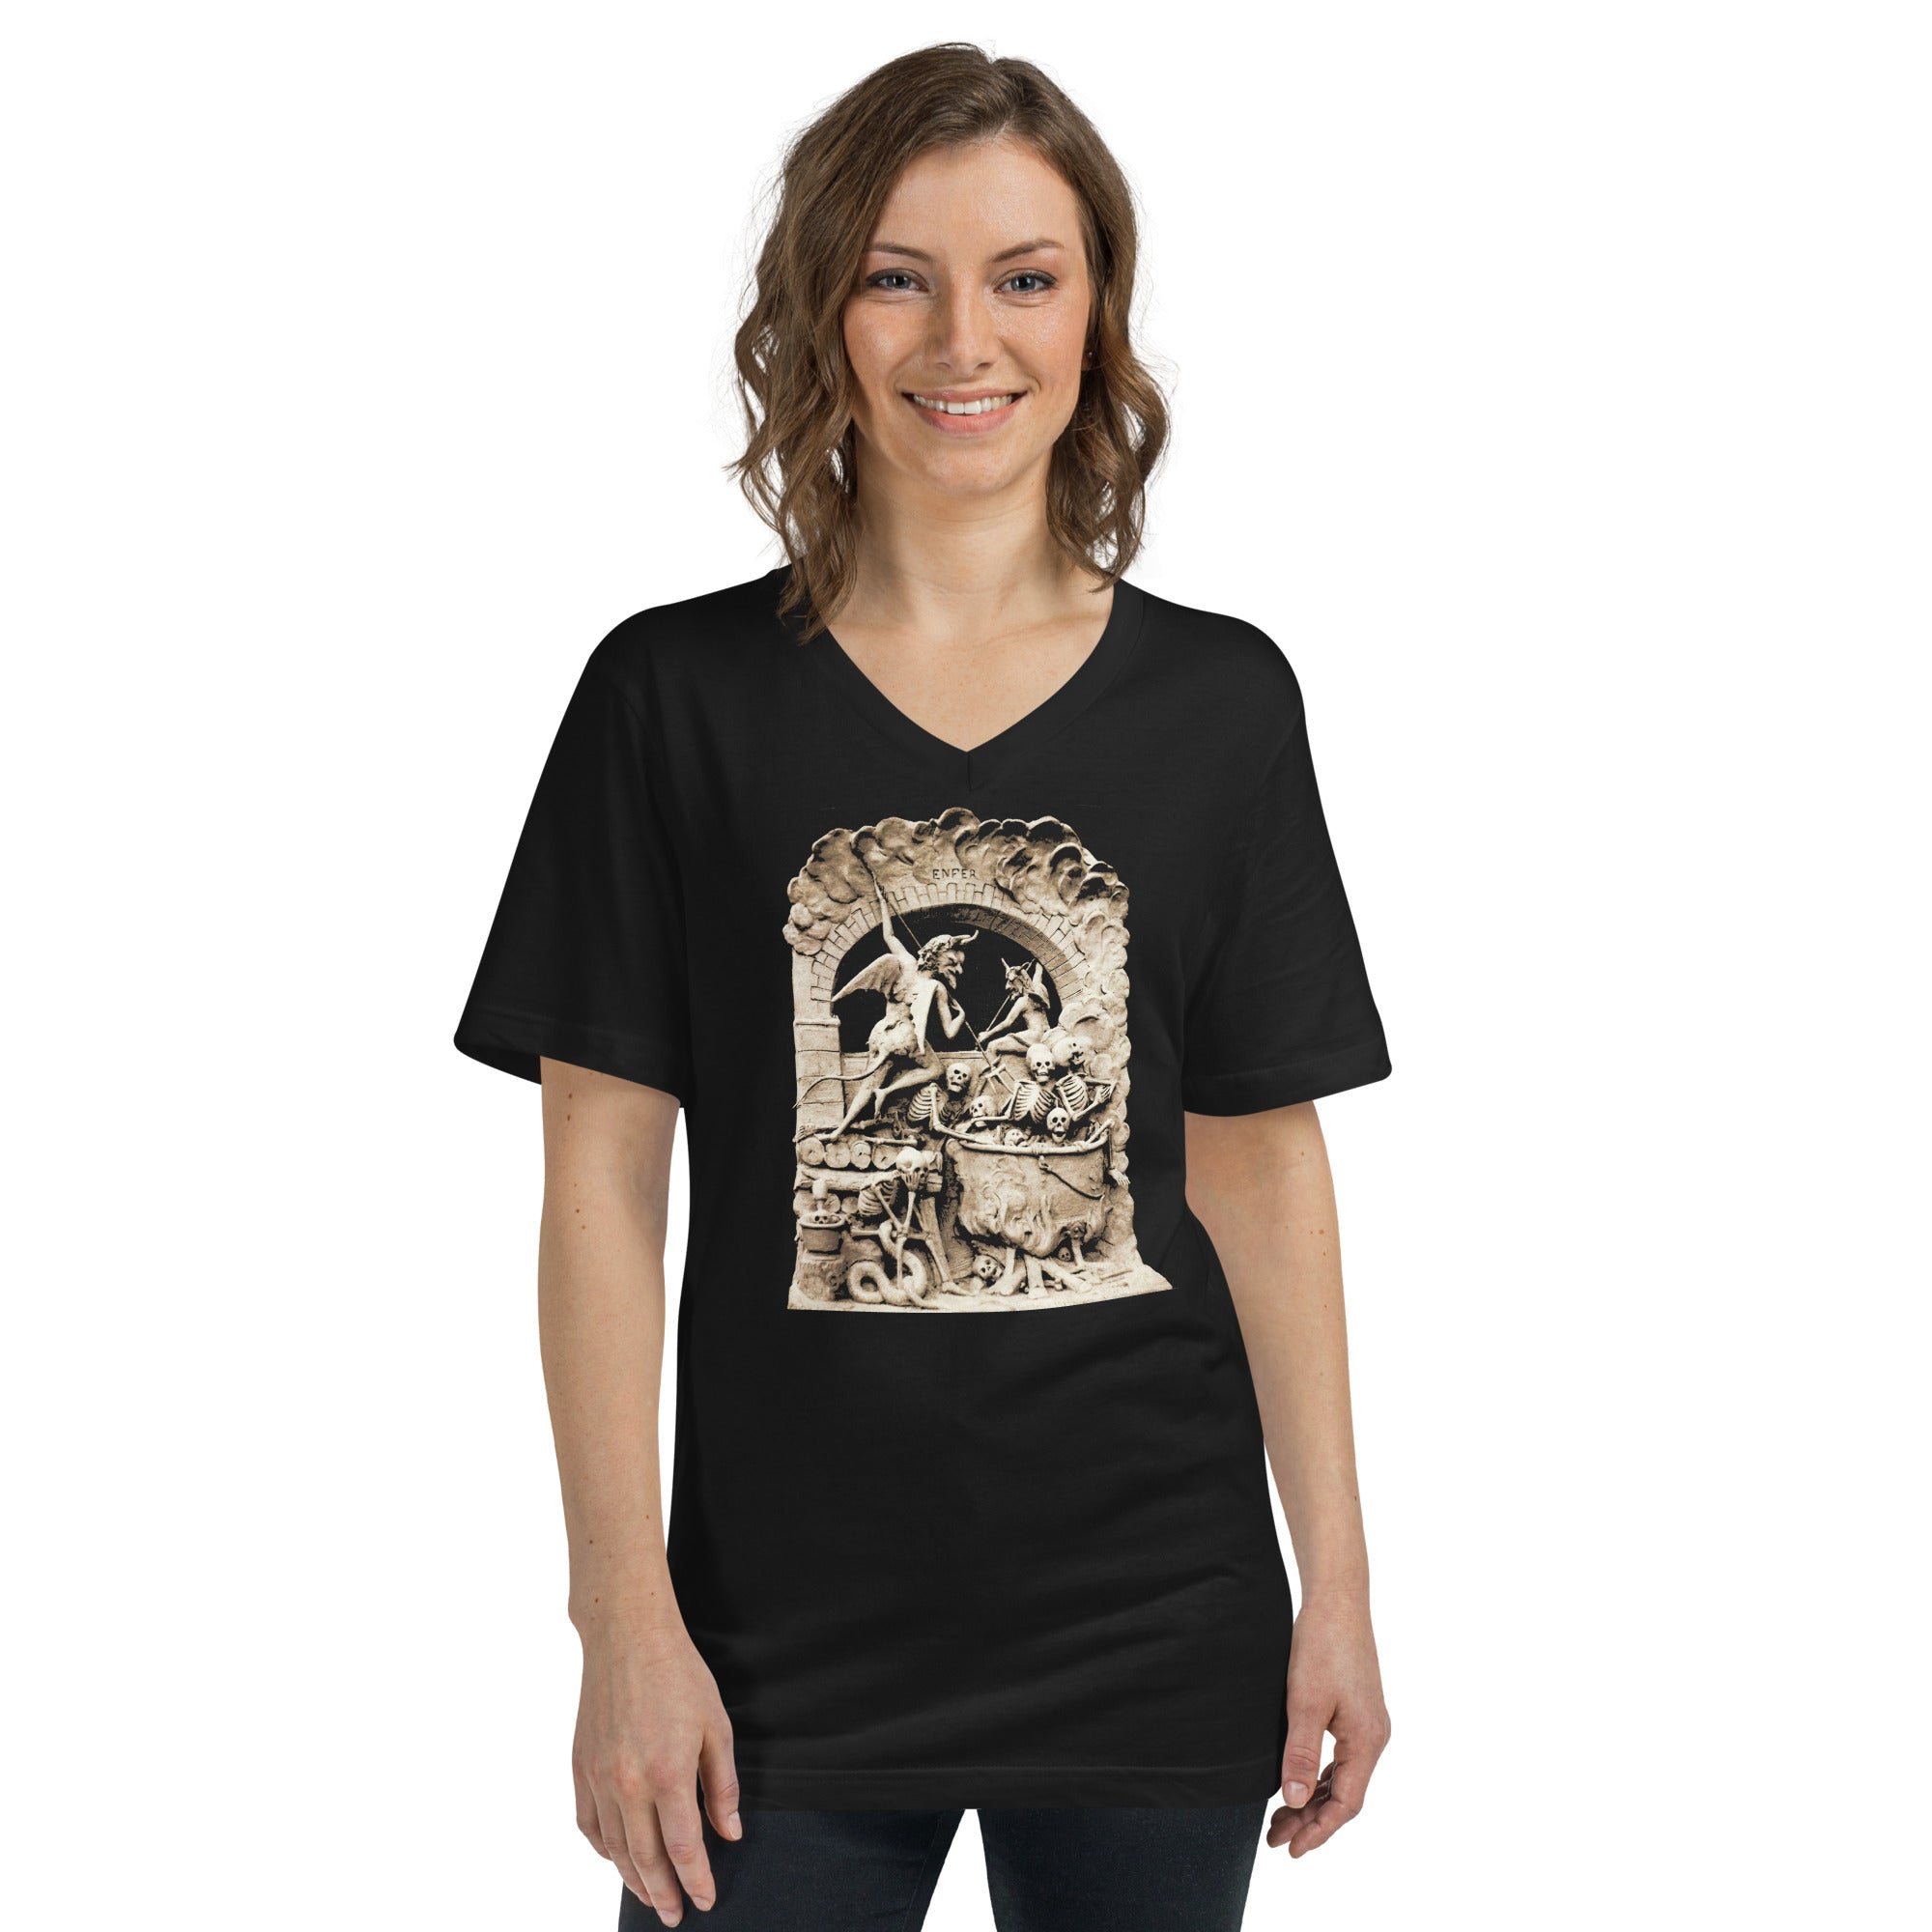 Les Diableries The Pits of Hell and the Devil Women’s Short Sleeve V-Neck T-Shirt - Edge of Life Designs